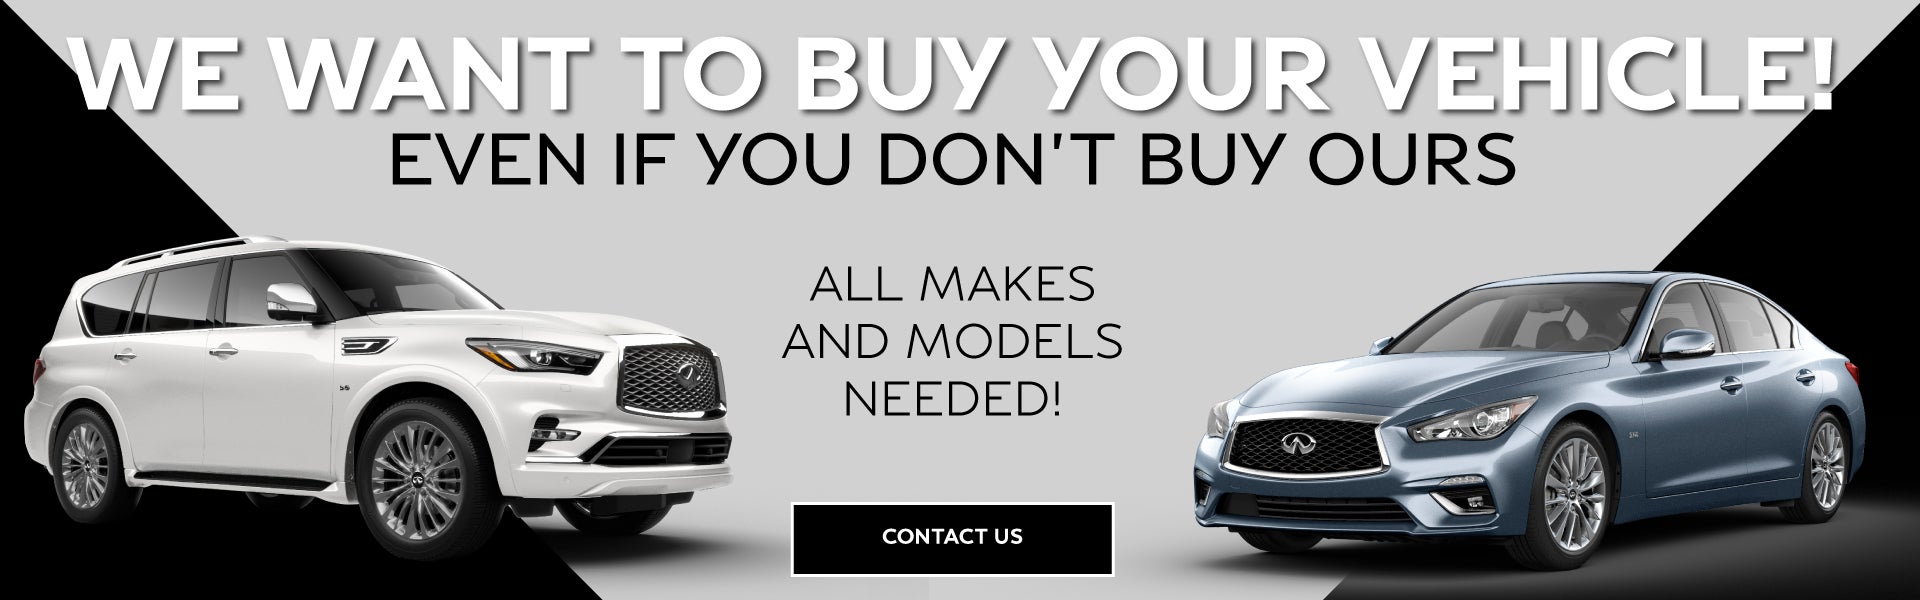 We want to buy your vehicle even if you don't buy ours